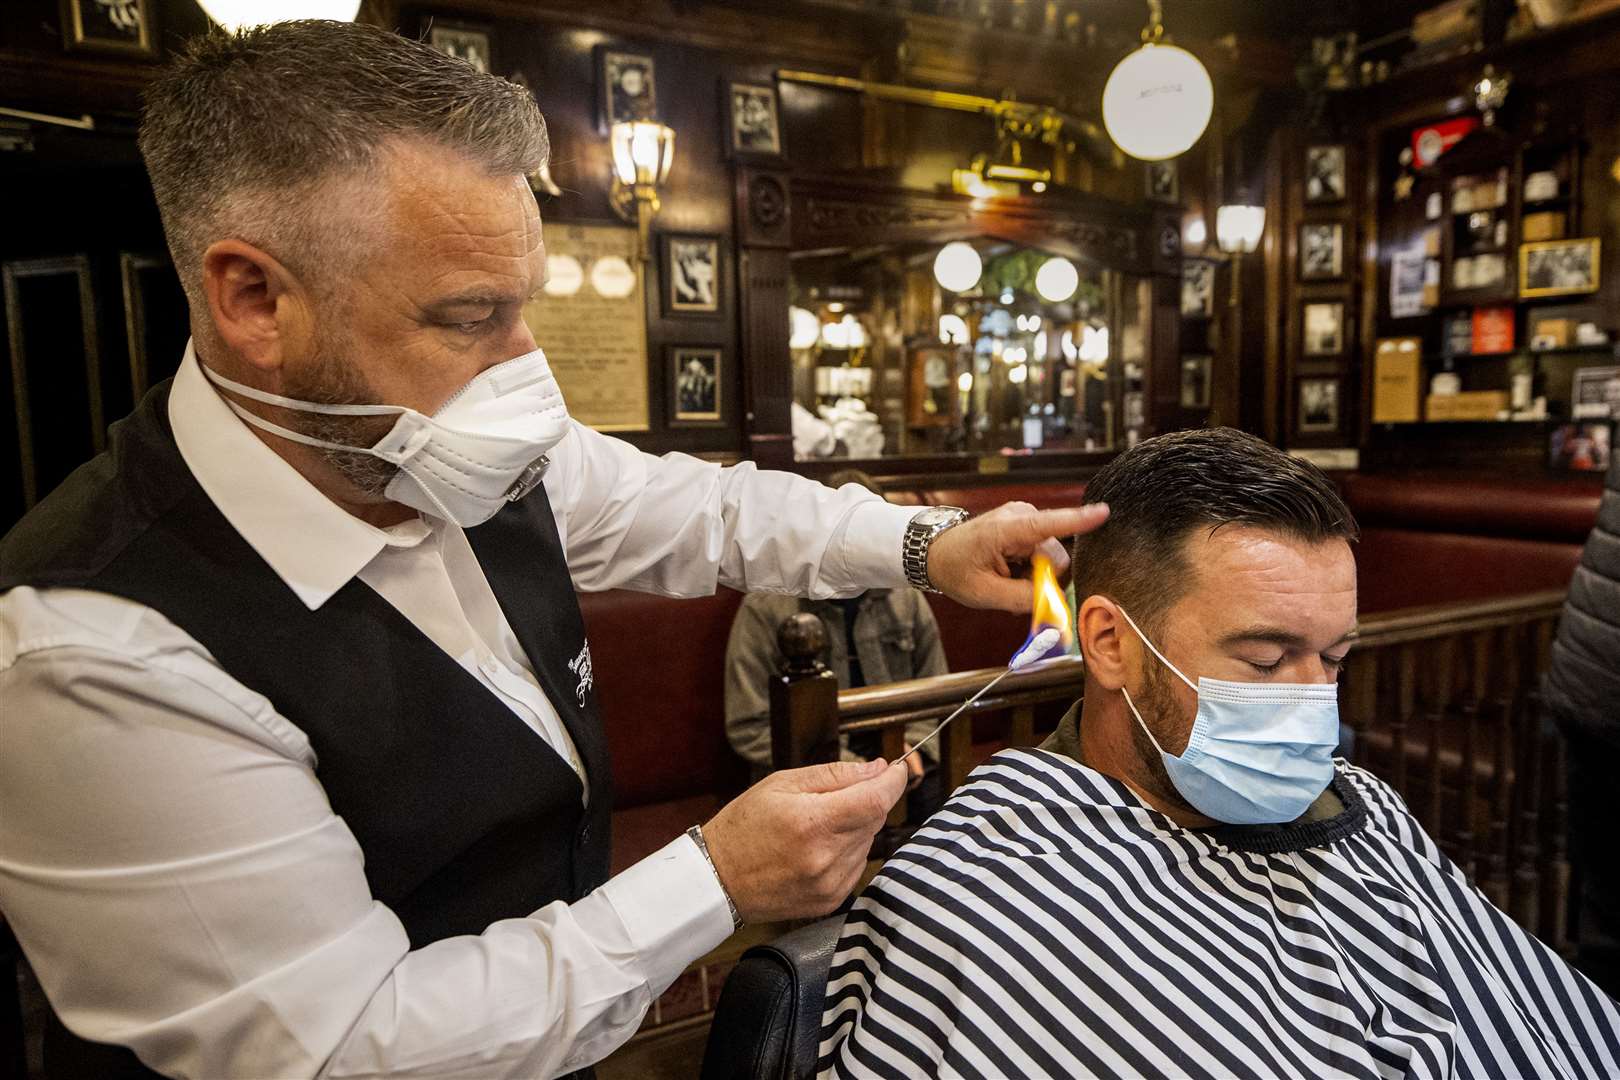 People in Northern Ireland can get their hair cut from Friday as hairdressers reopen (Liam McBurney/PA)